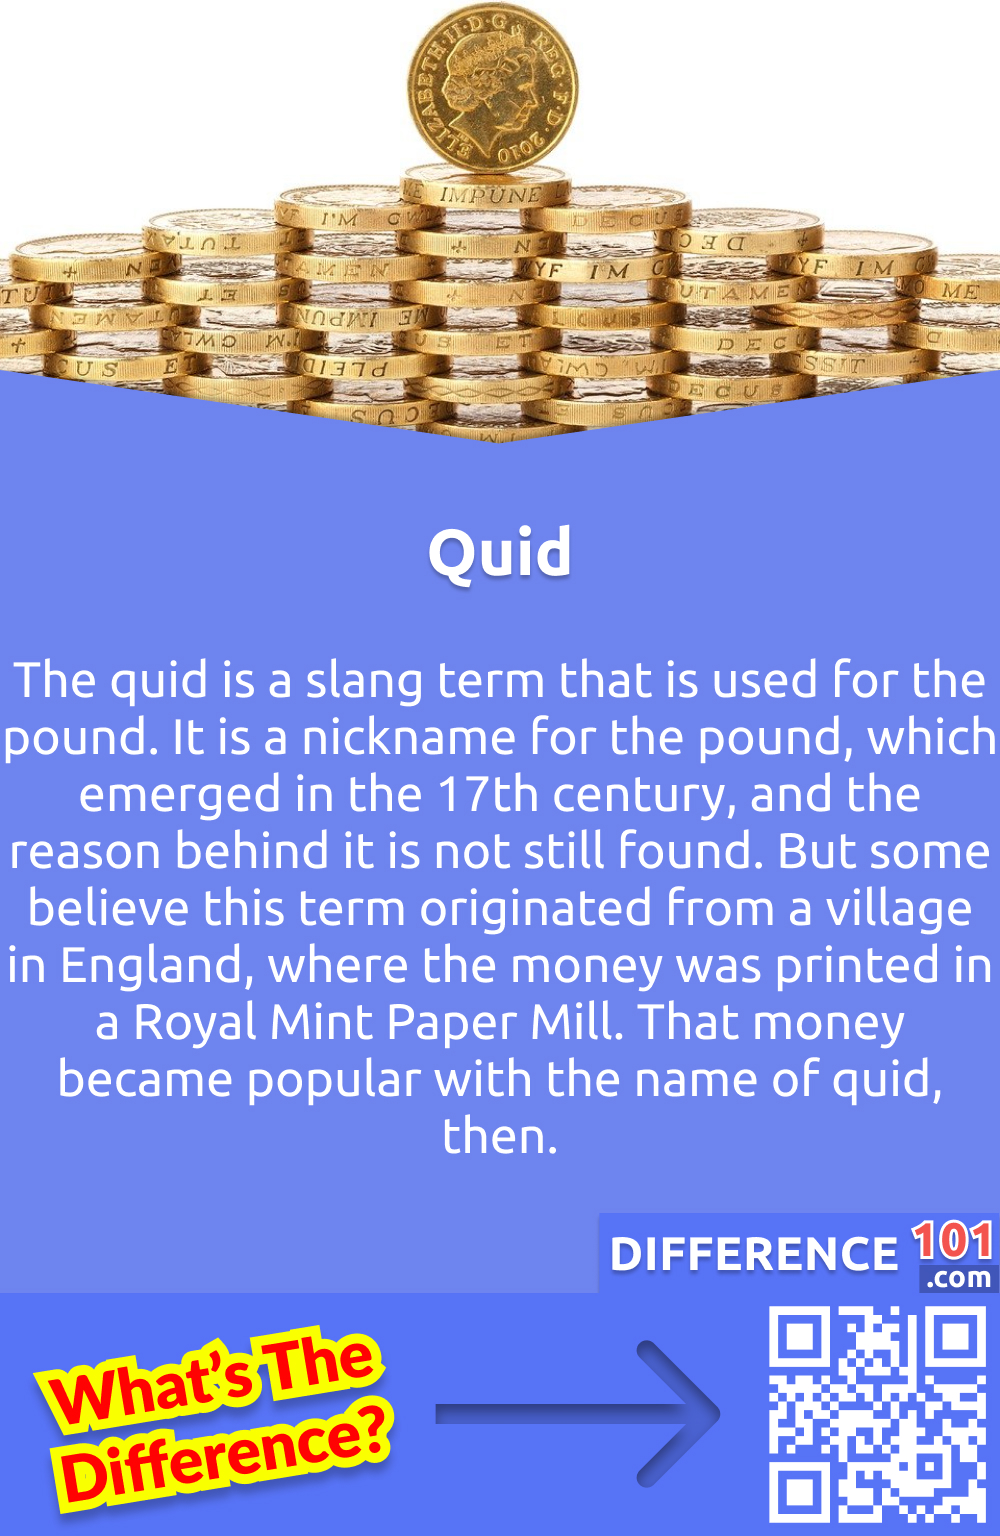 What Is Quid? The quid is a slang term that is used for the pound. It is a nickname for the pound, which emerged in the 17th century, and the reason behind it is not still found. But some believe this term originated from a village in England, where the money was printed in a Royal Mint Paper Mill. That money became popular with the name of quid, then.